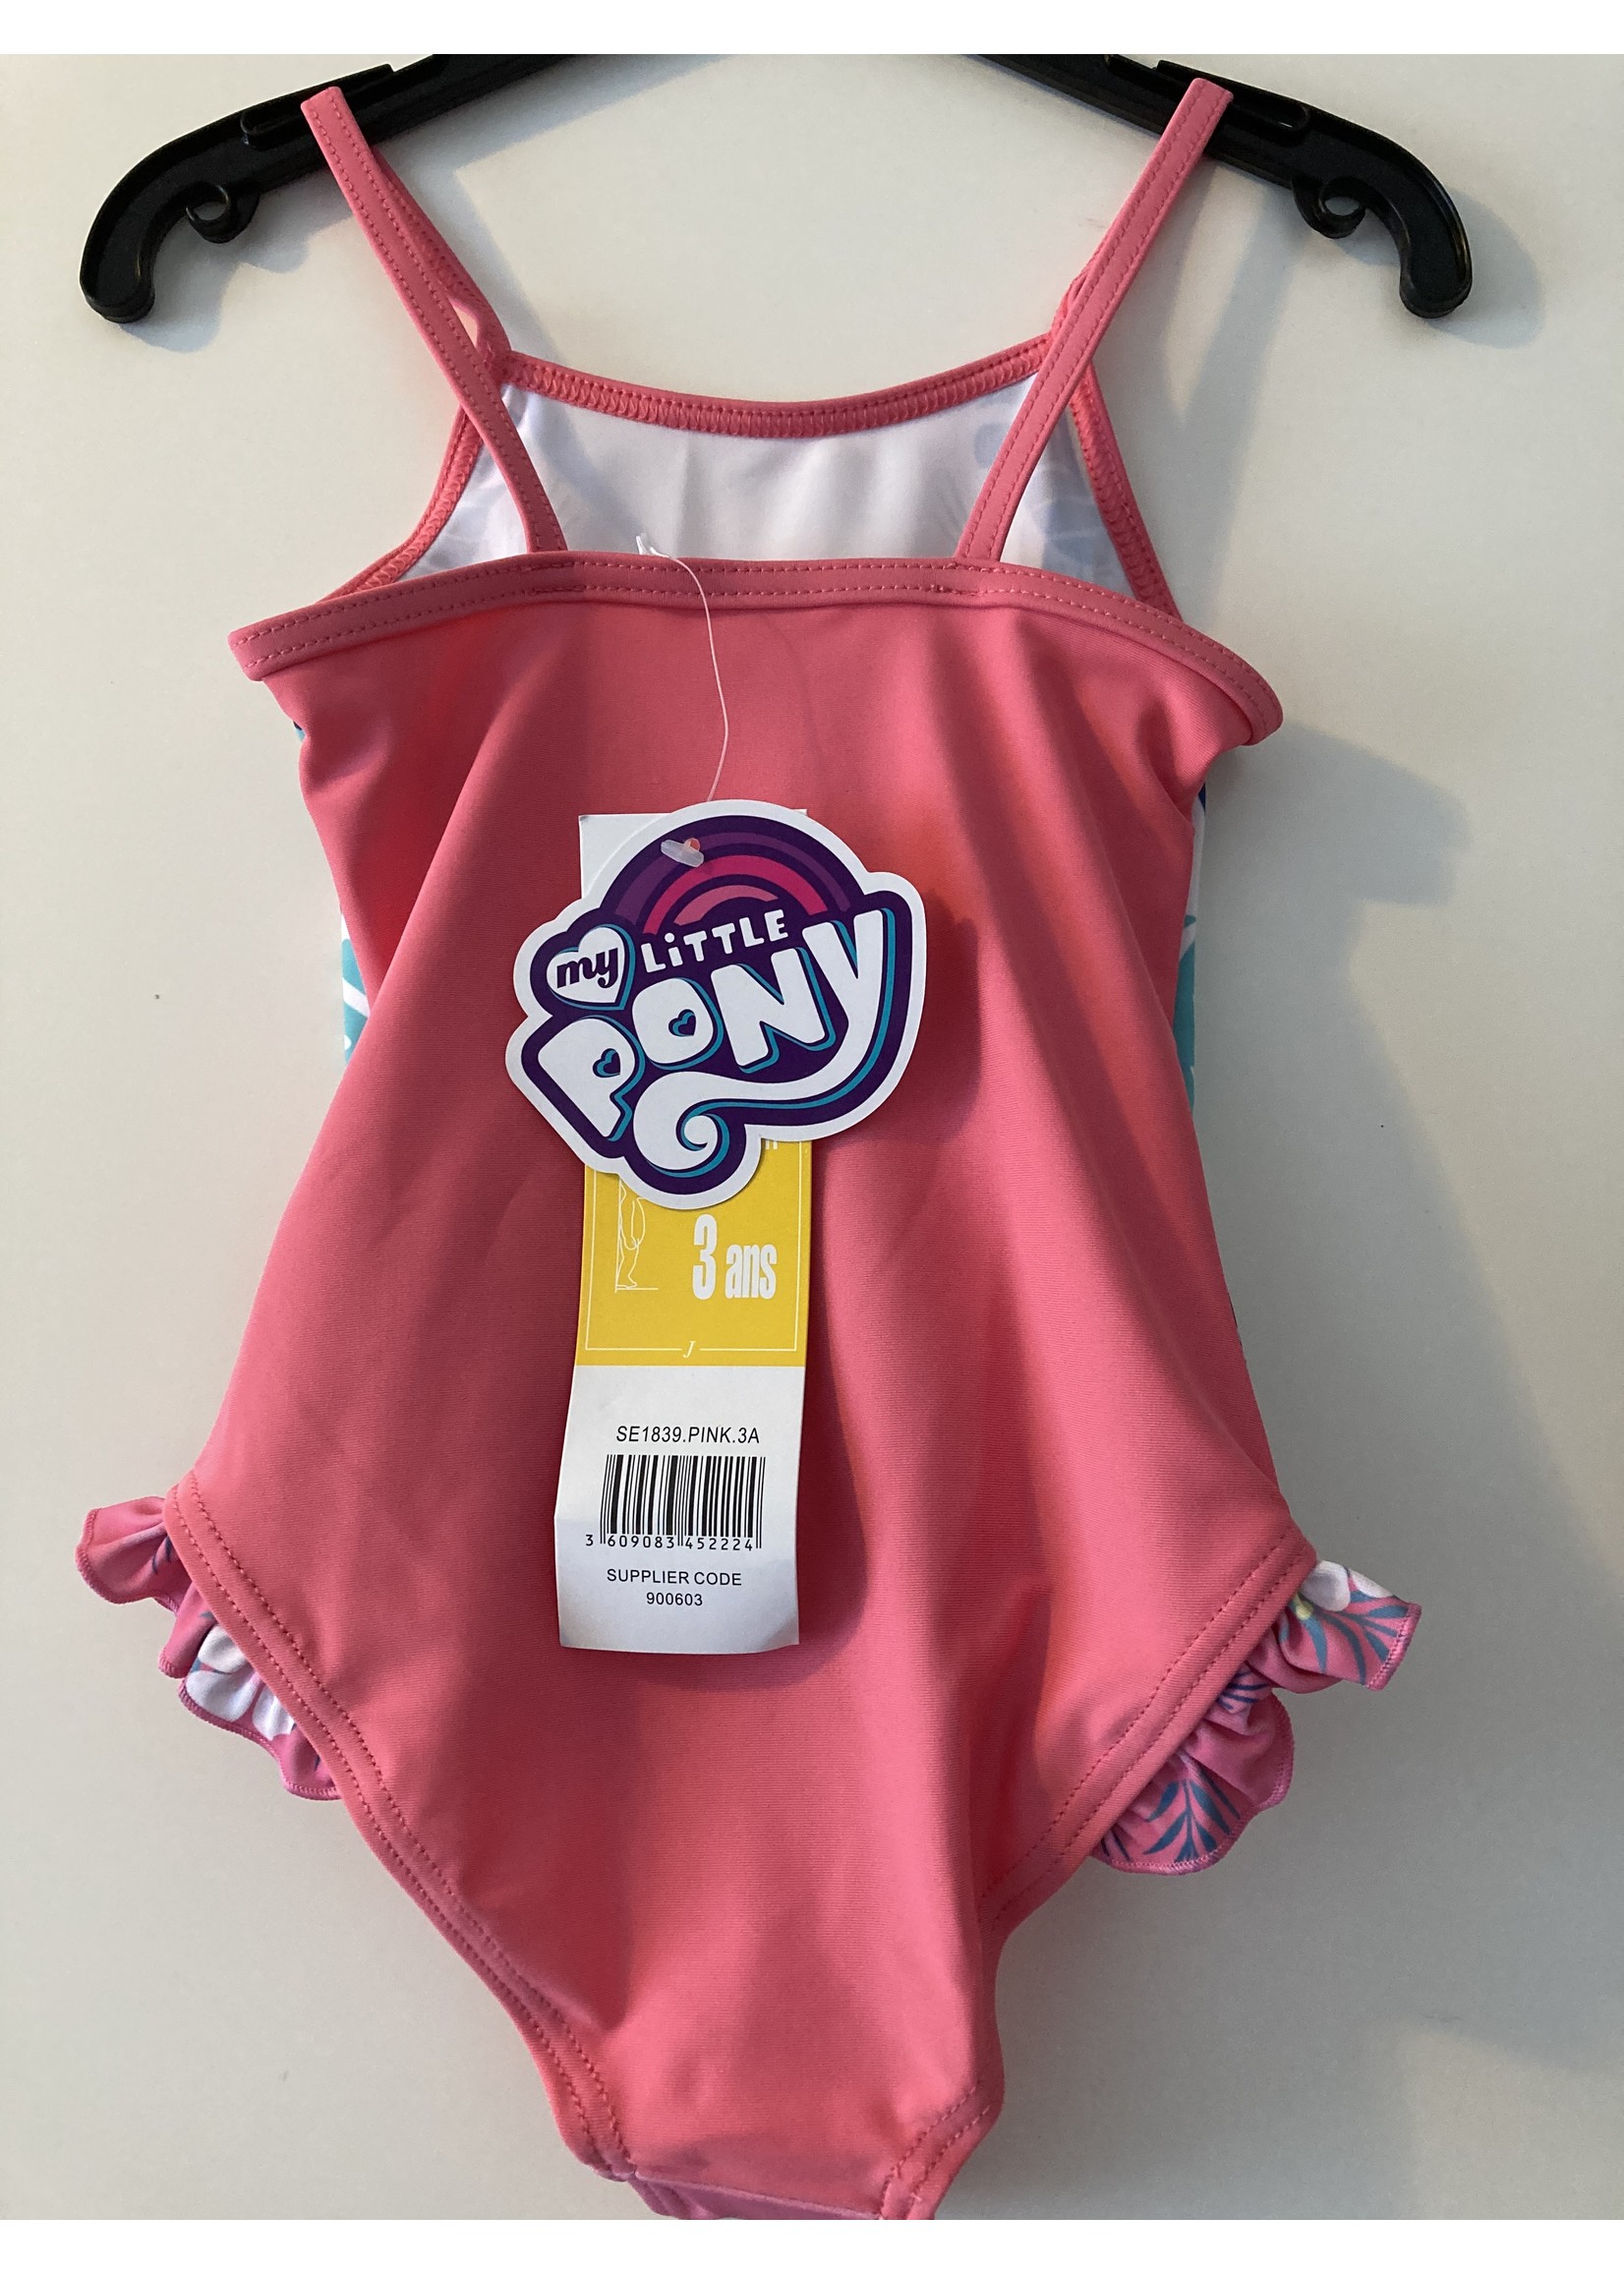 My little Pony Swimsuit from My little pony pink